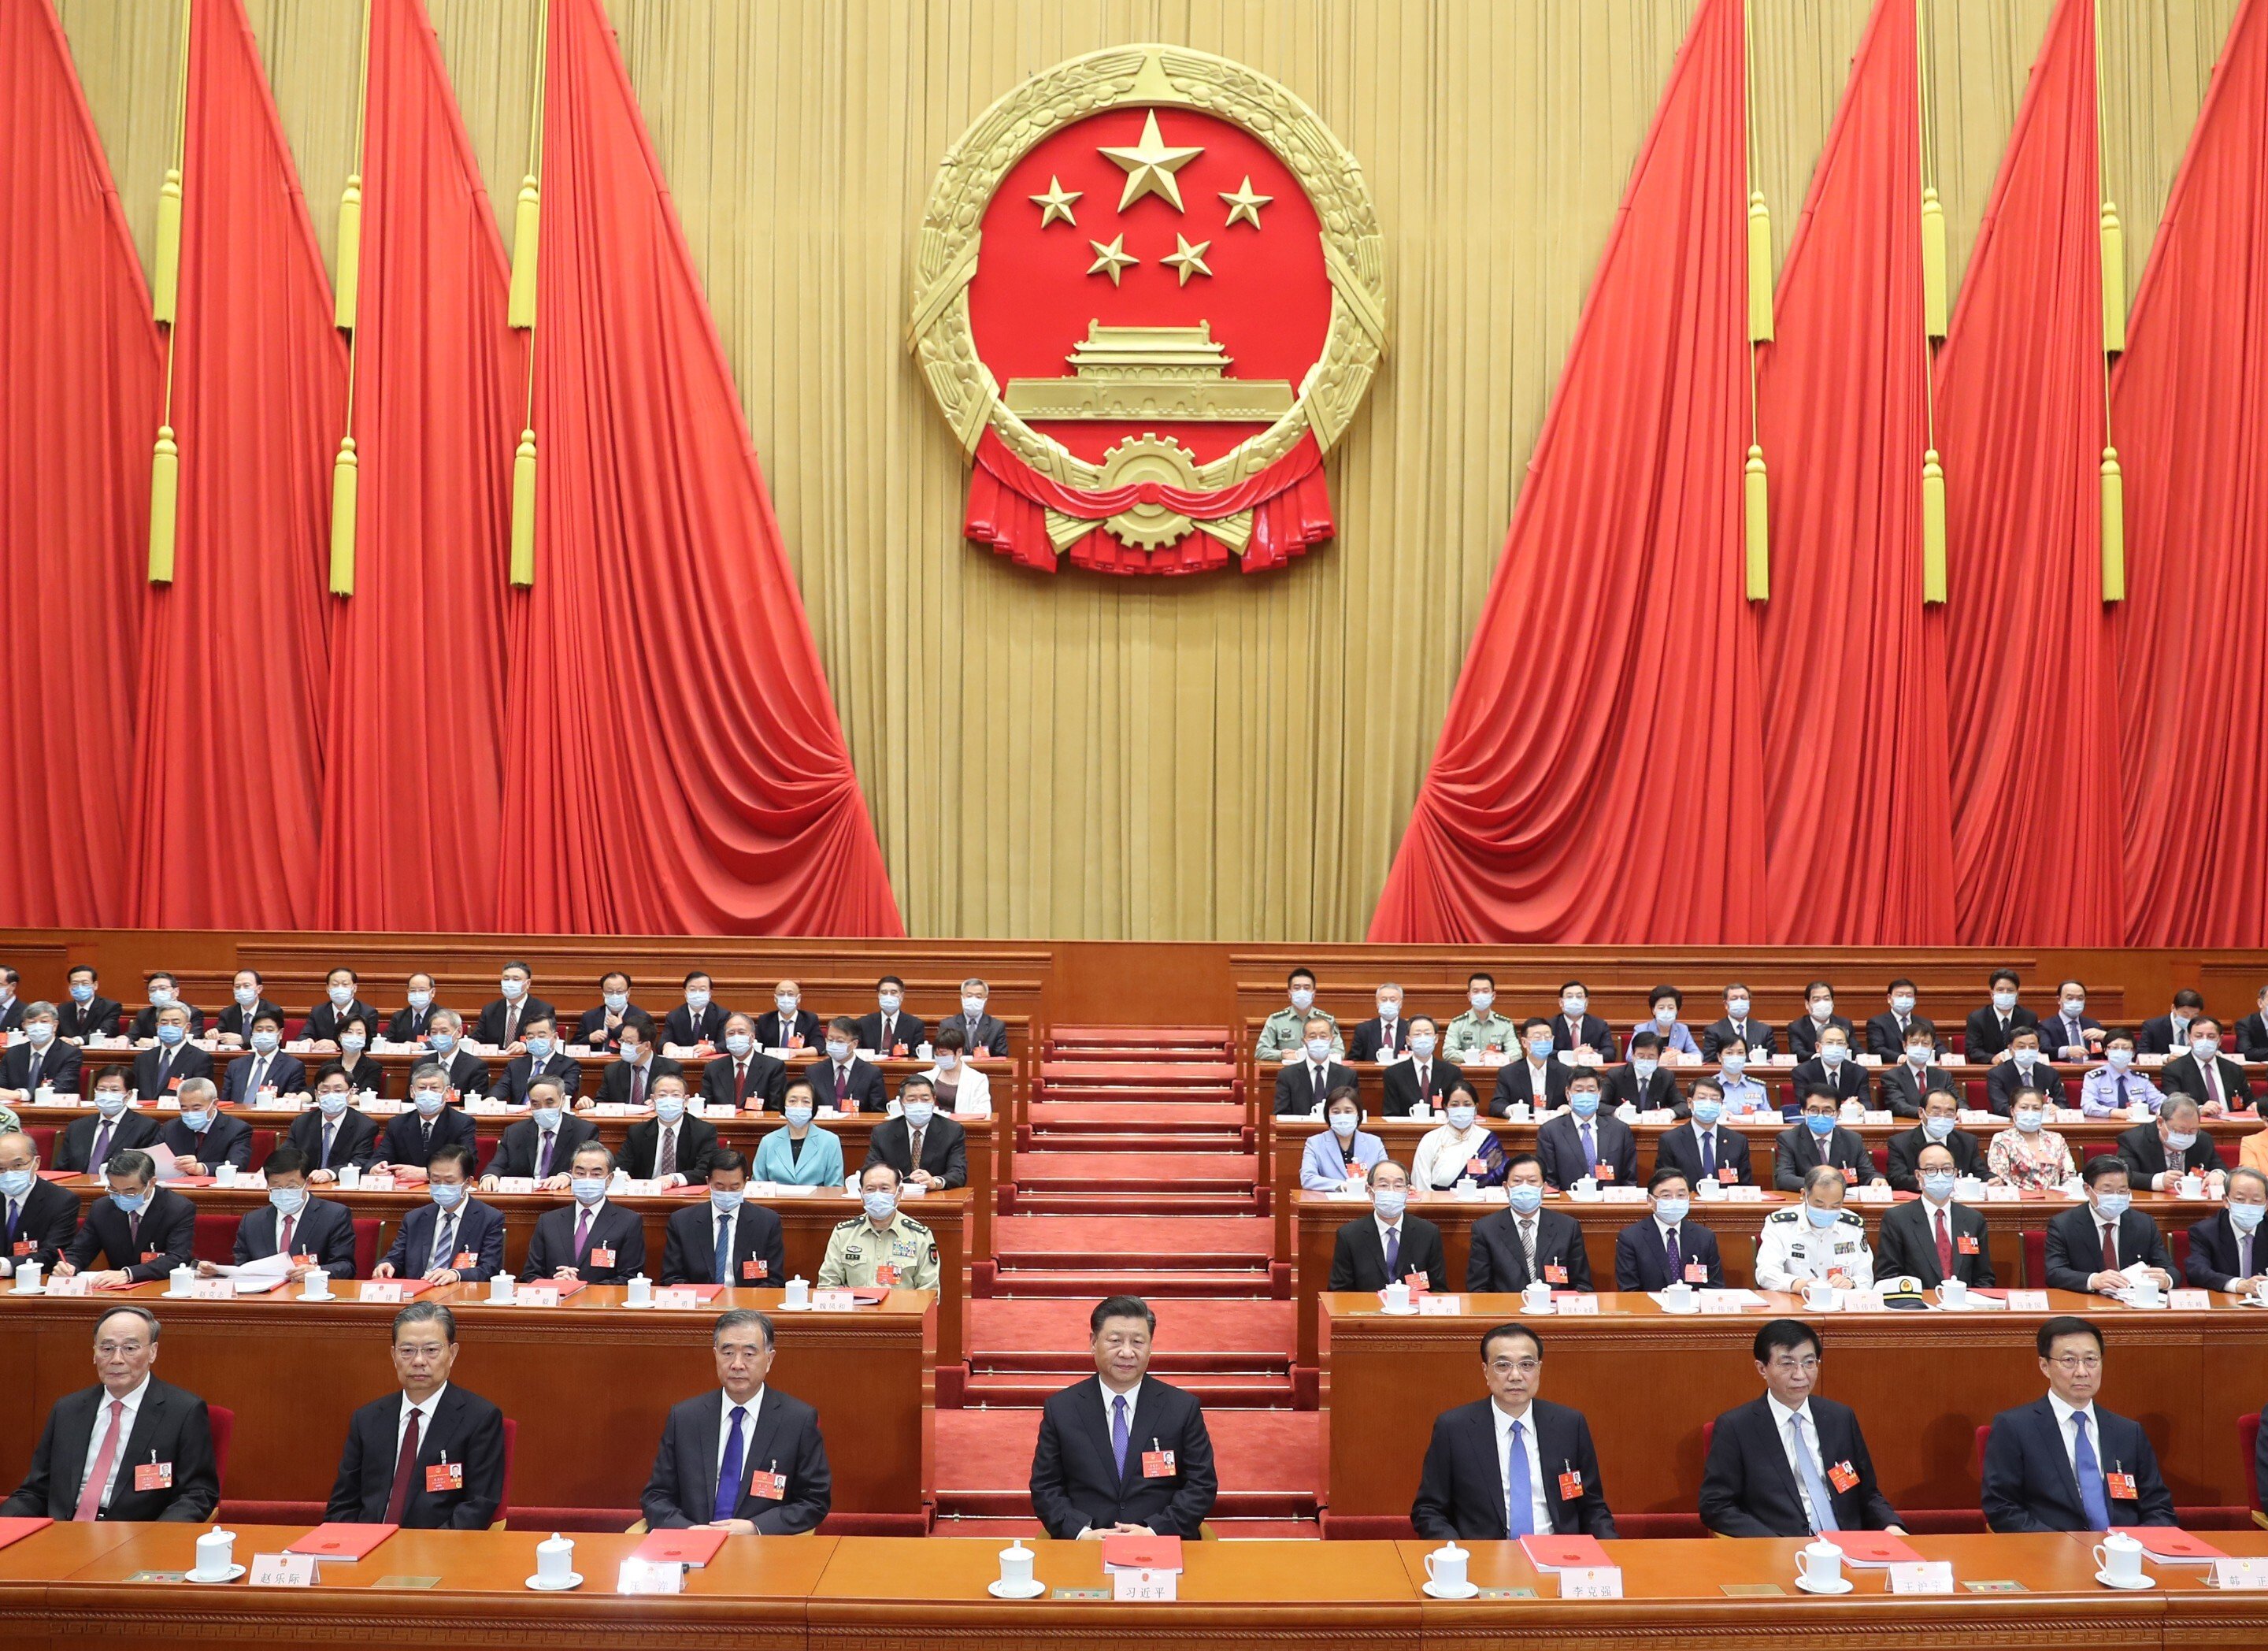 The closing meeting of the third session of the 13th National People's Congress (NPC) is held at the Great Hall of the People in Beijing, capital of China, on May 28, 2020. Photo: Xinhua